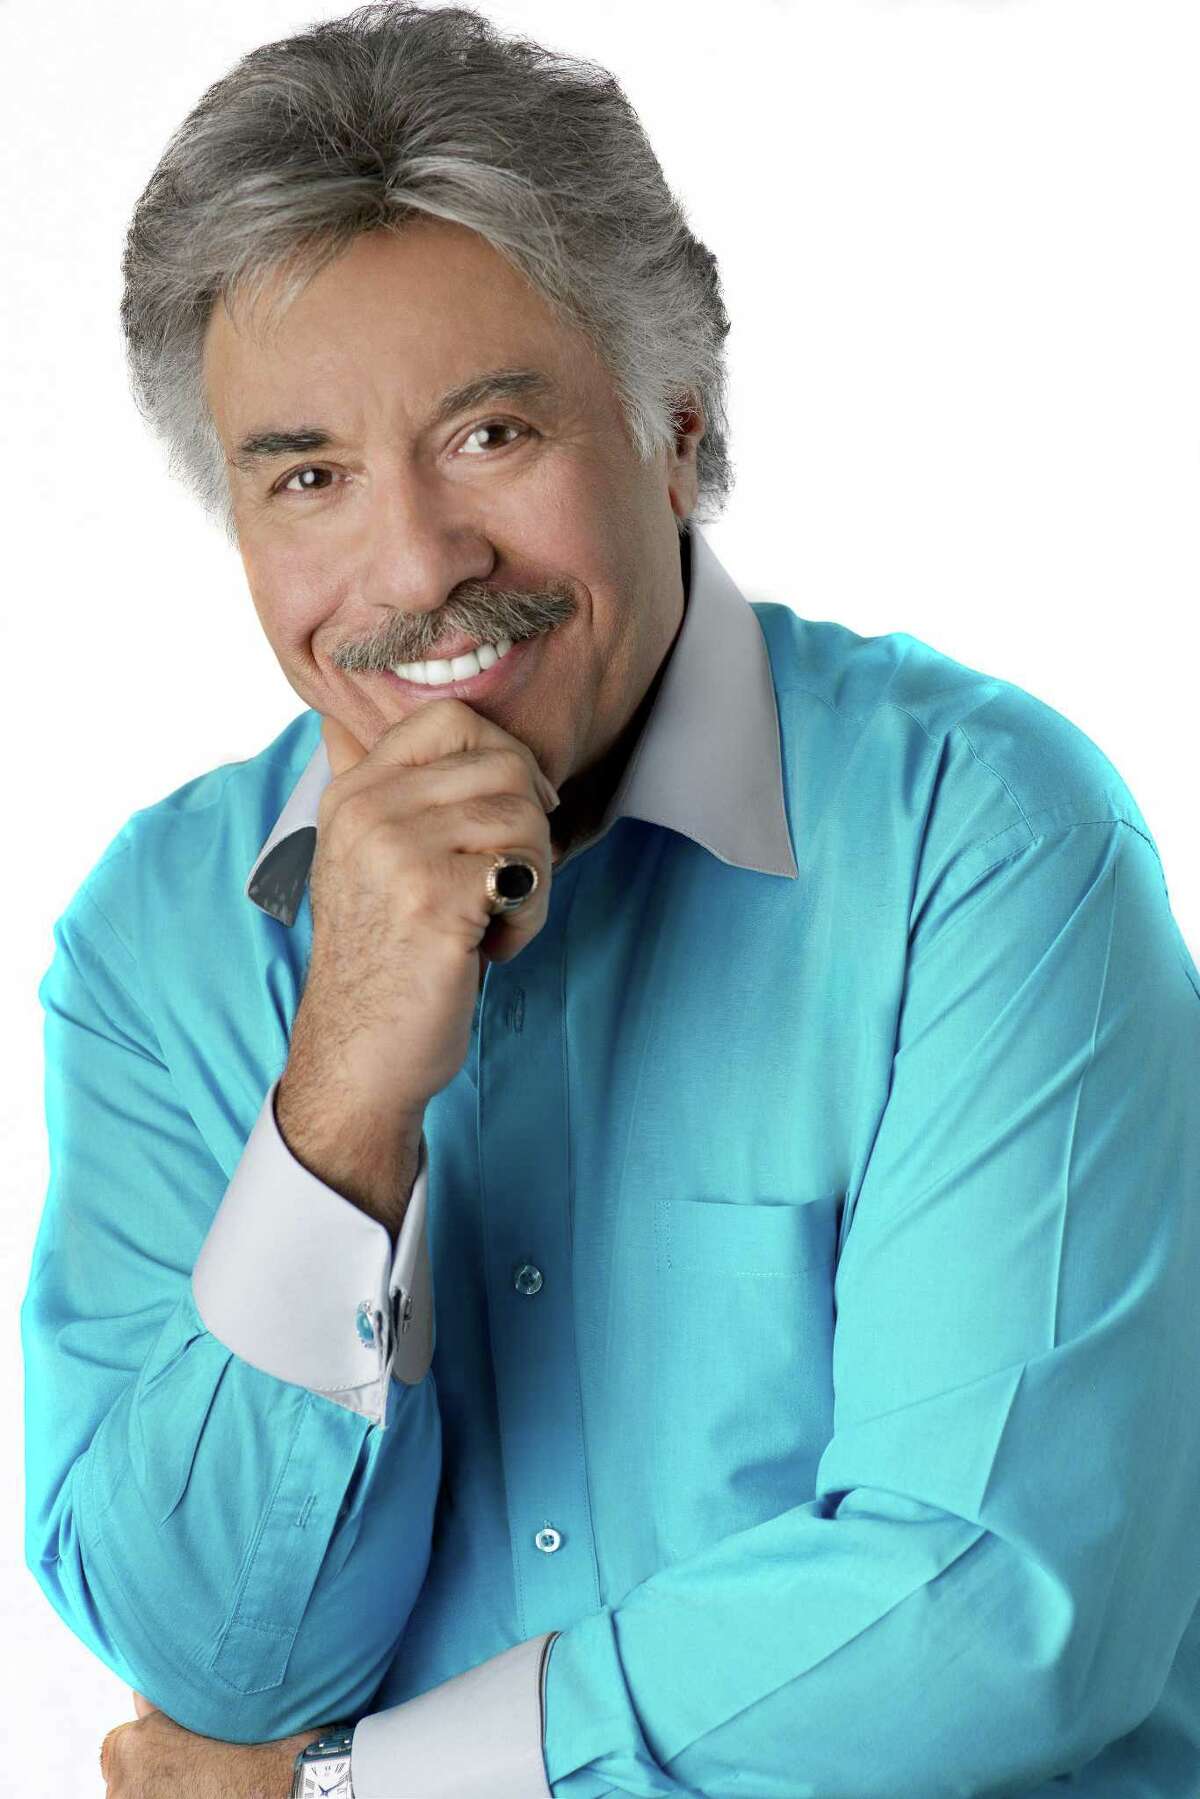 EAST HAVEN FALL FEST: Tony Orlando will be making a return visit to the East Haven Fall Festival, leading the entertainment for the 27th annual event being held Sept. 7-9 on the Town Green. Theo Peoples, former lead singer of The Four Tops & The Temptations, will also perform on Sept. 7.